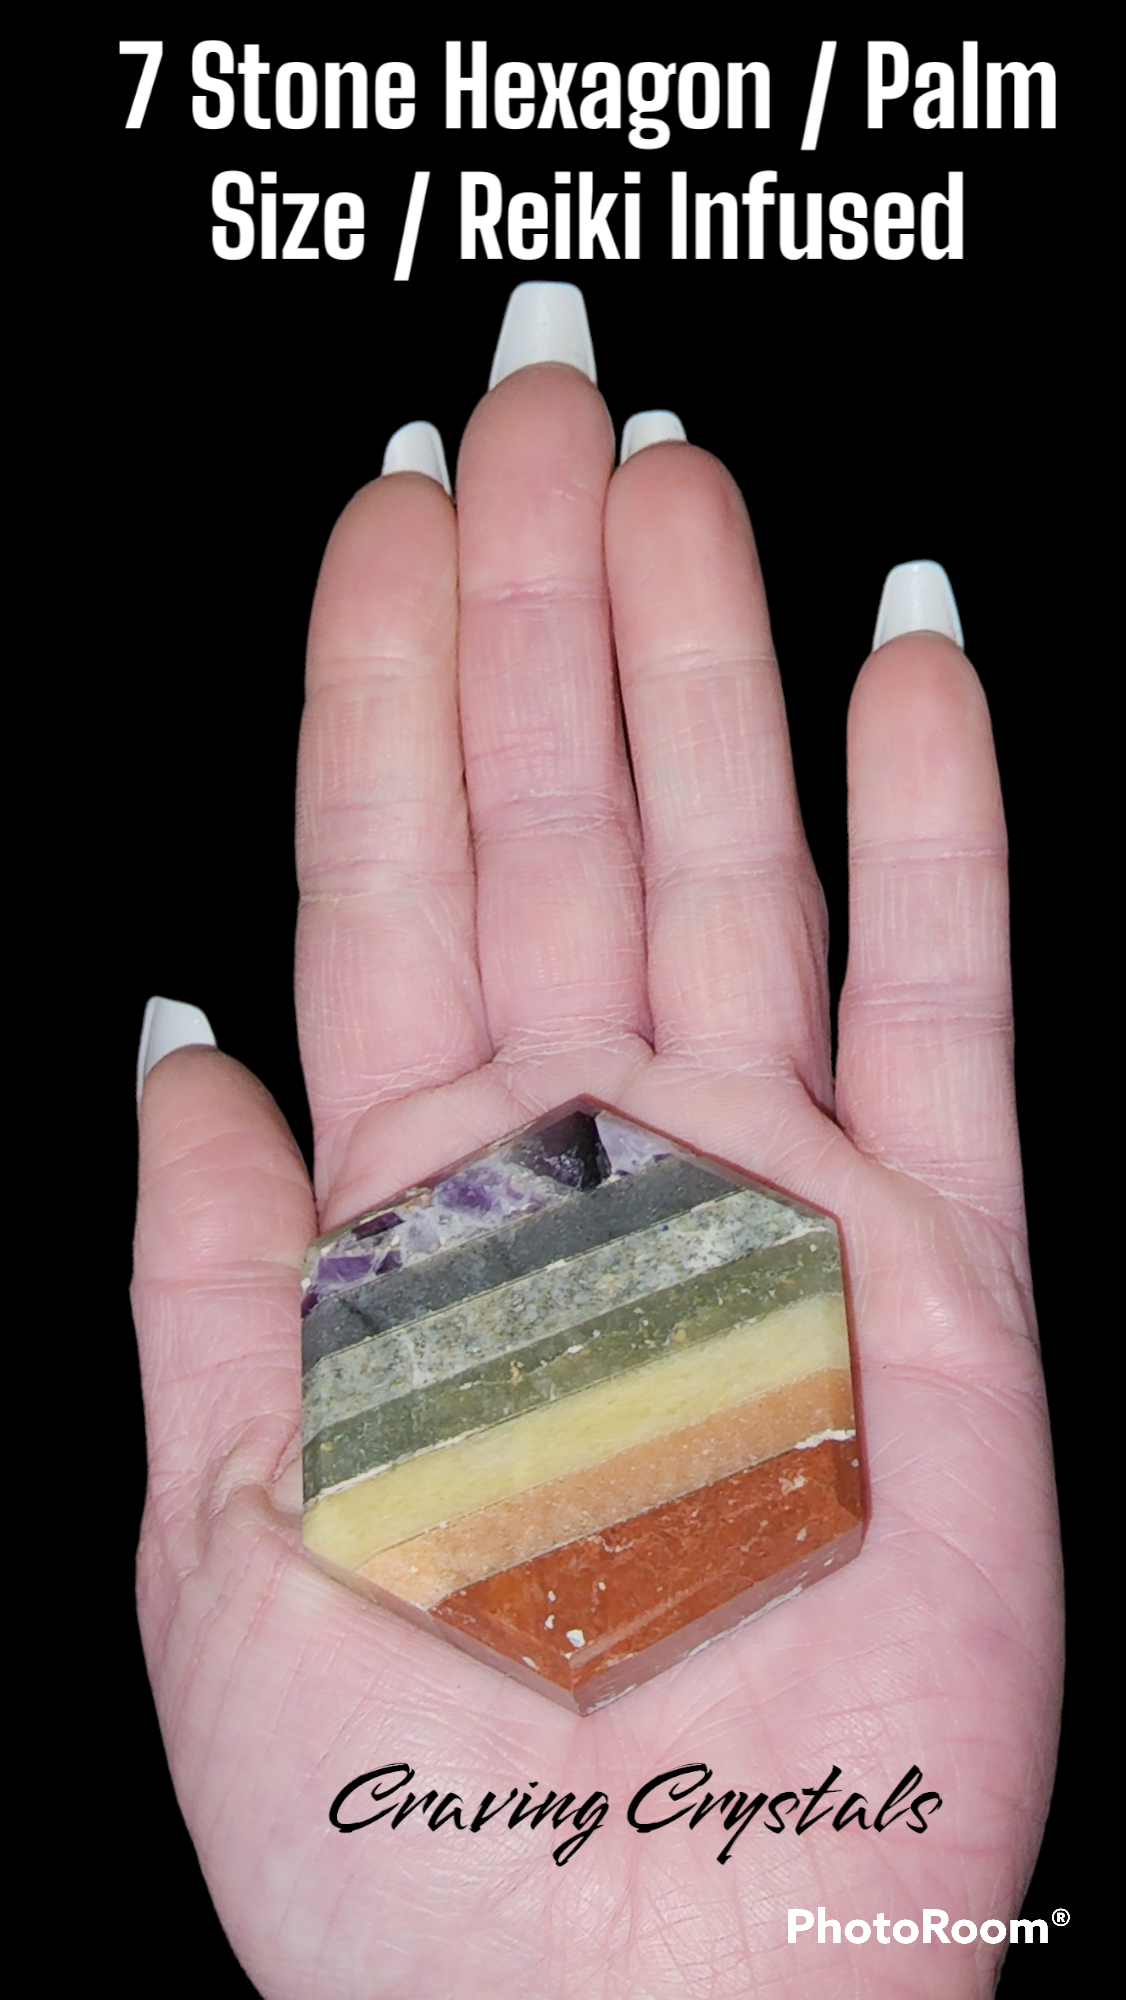 7 stone hexagonal palm size thats charged with healing reiki energy